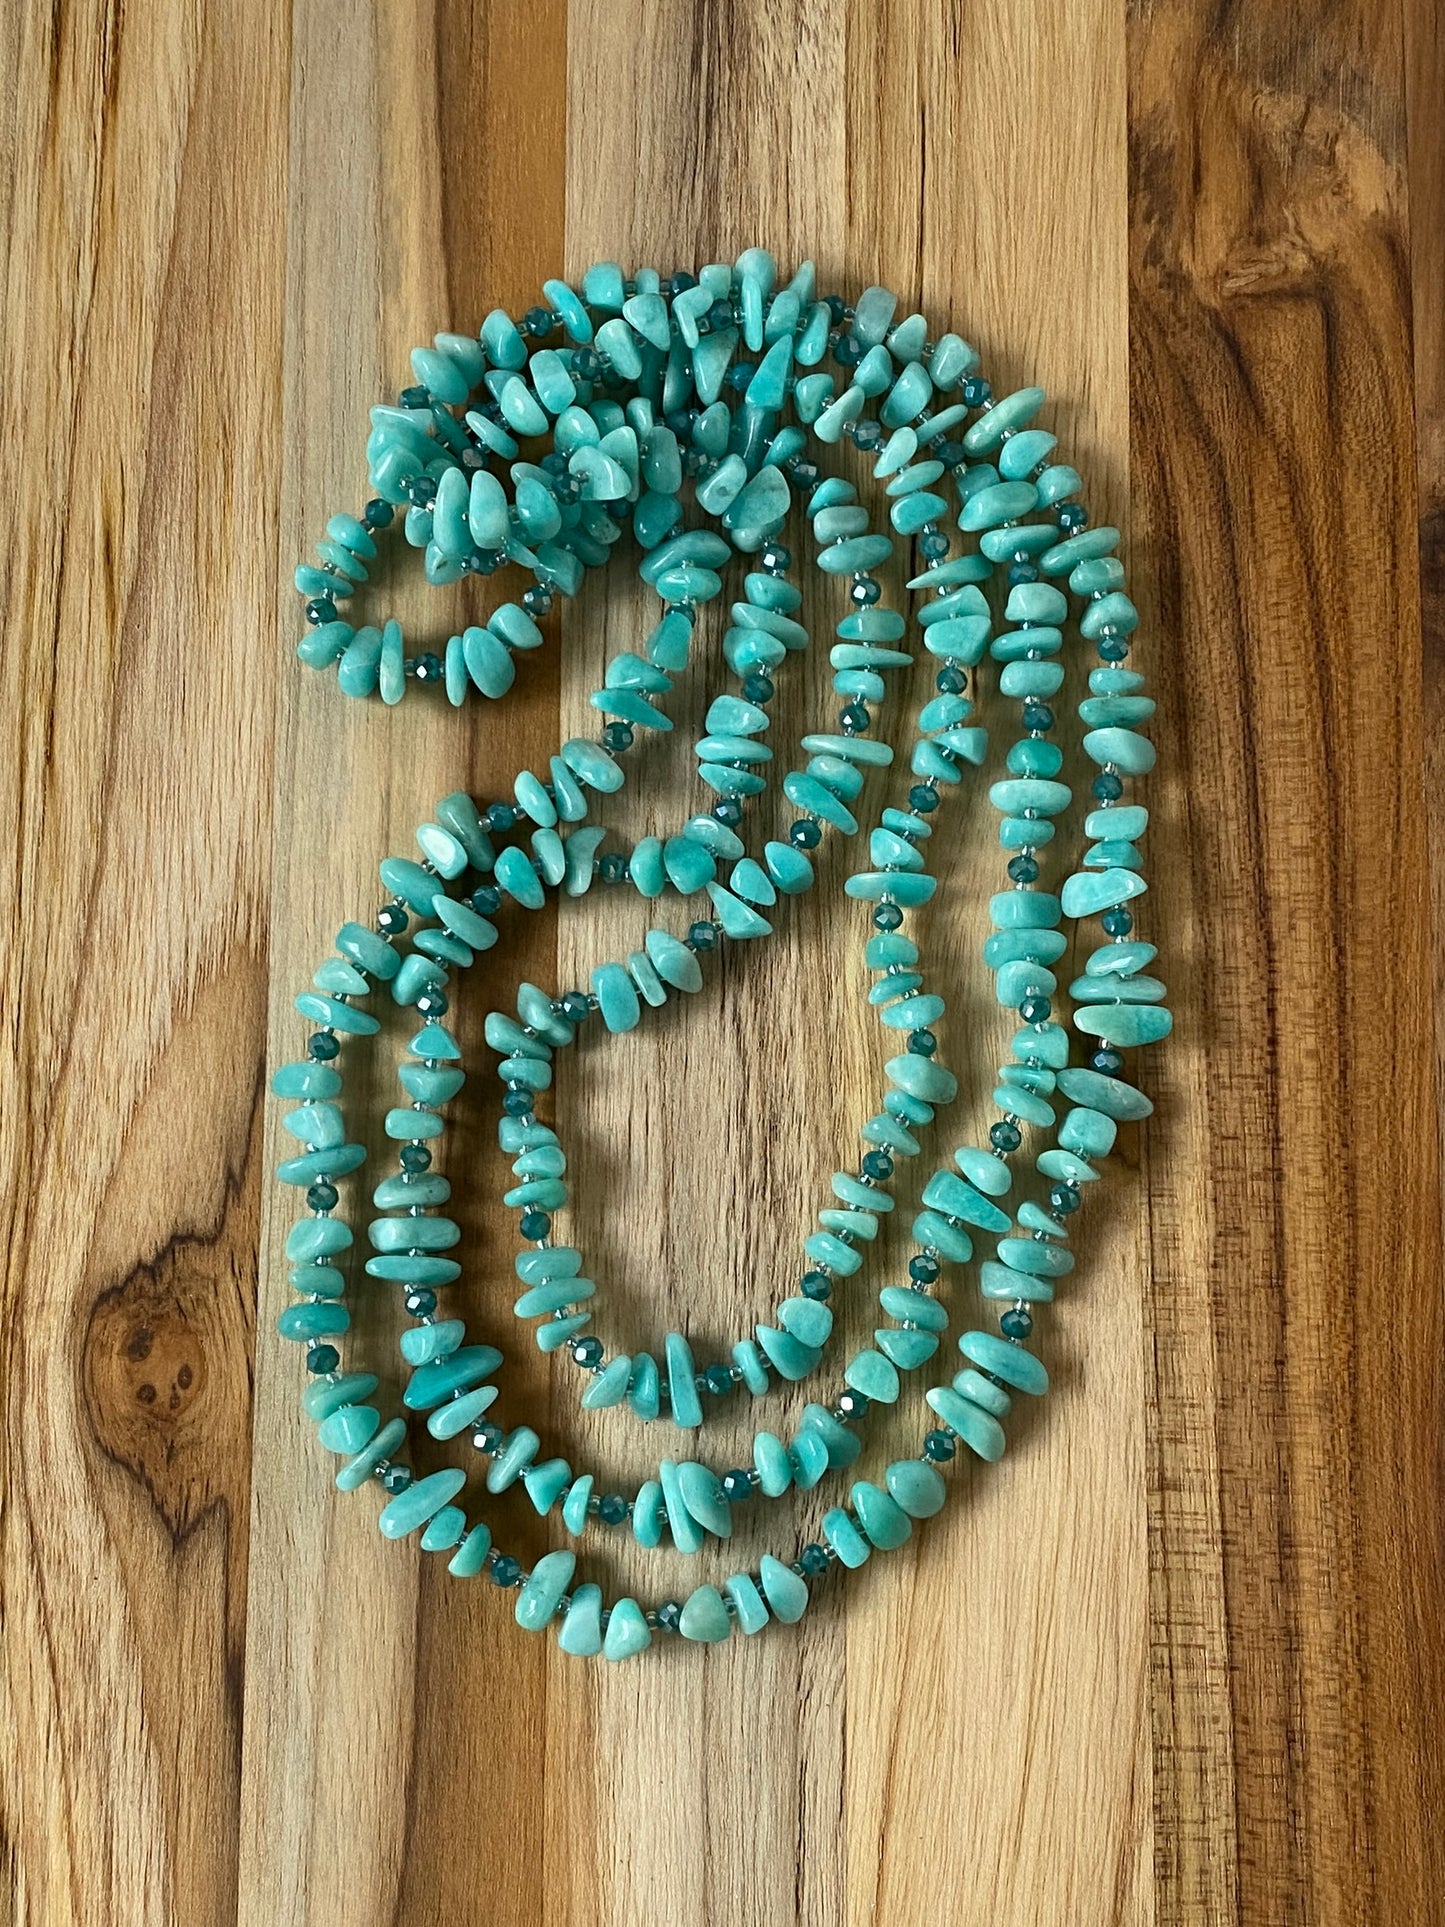 60" Extra Long Beaded Wraparound Amazonite Chip Bead Necklace with Crystals